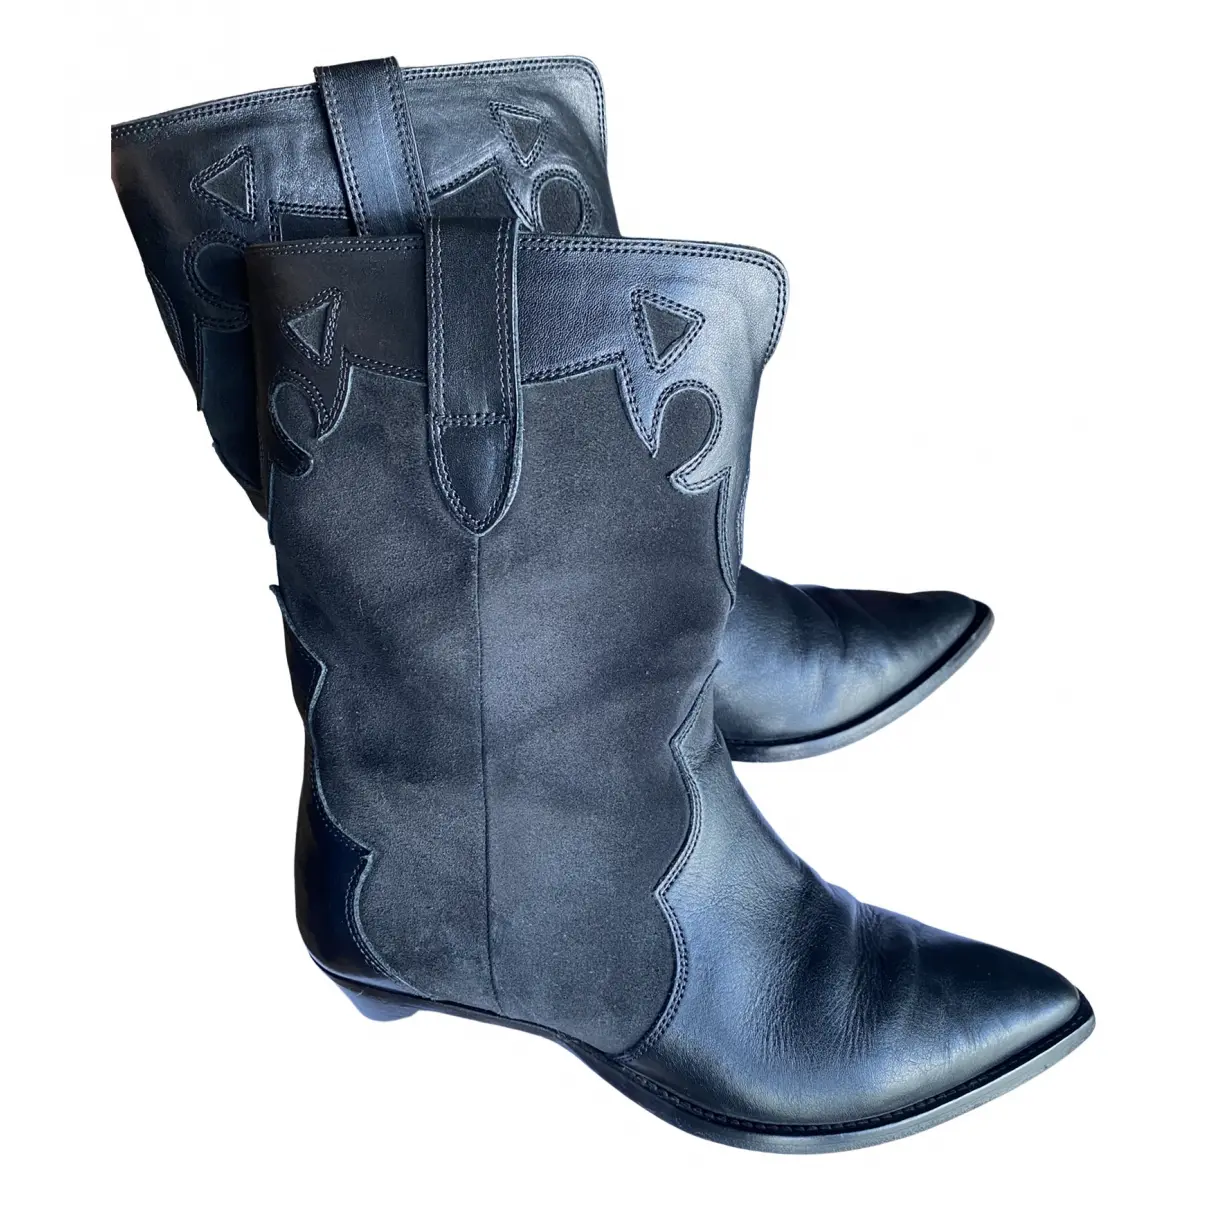 Duoni leather western boots Isabel Marant